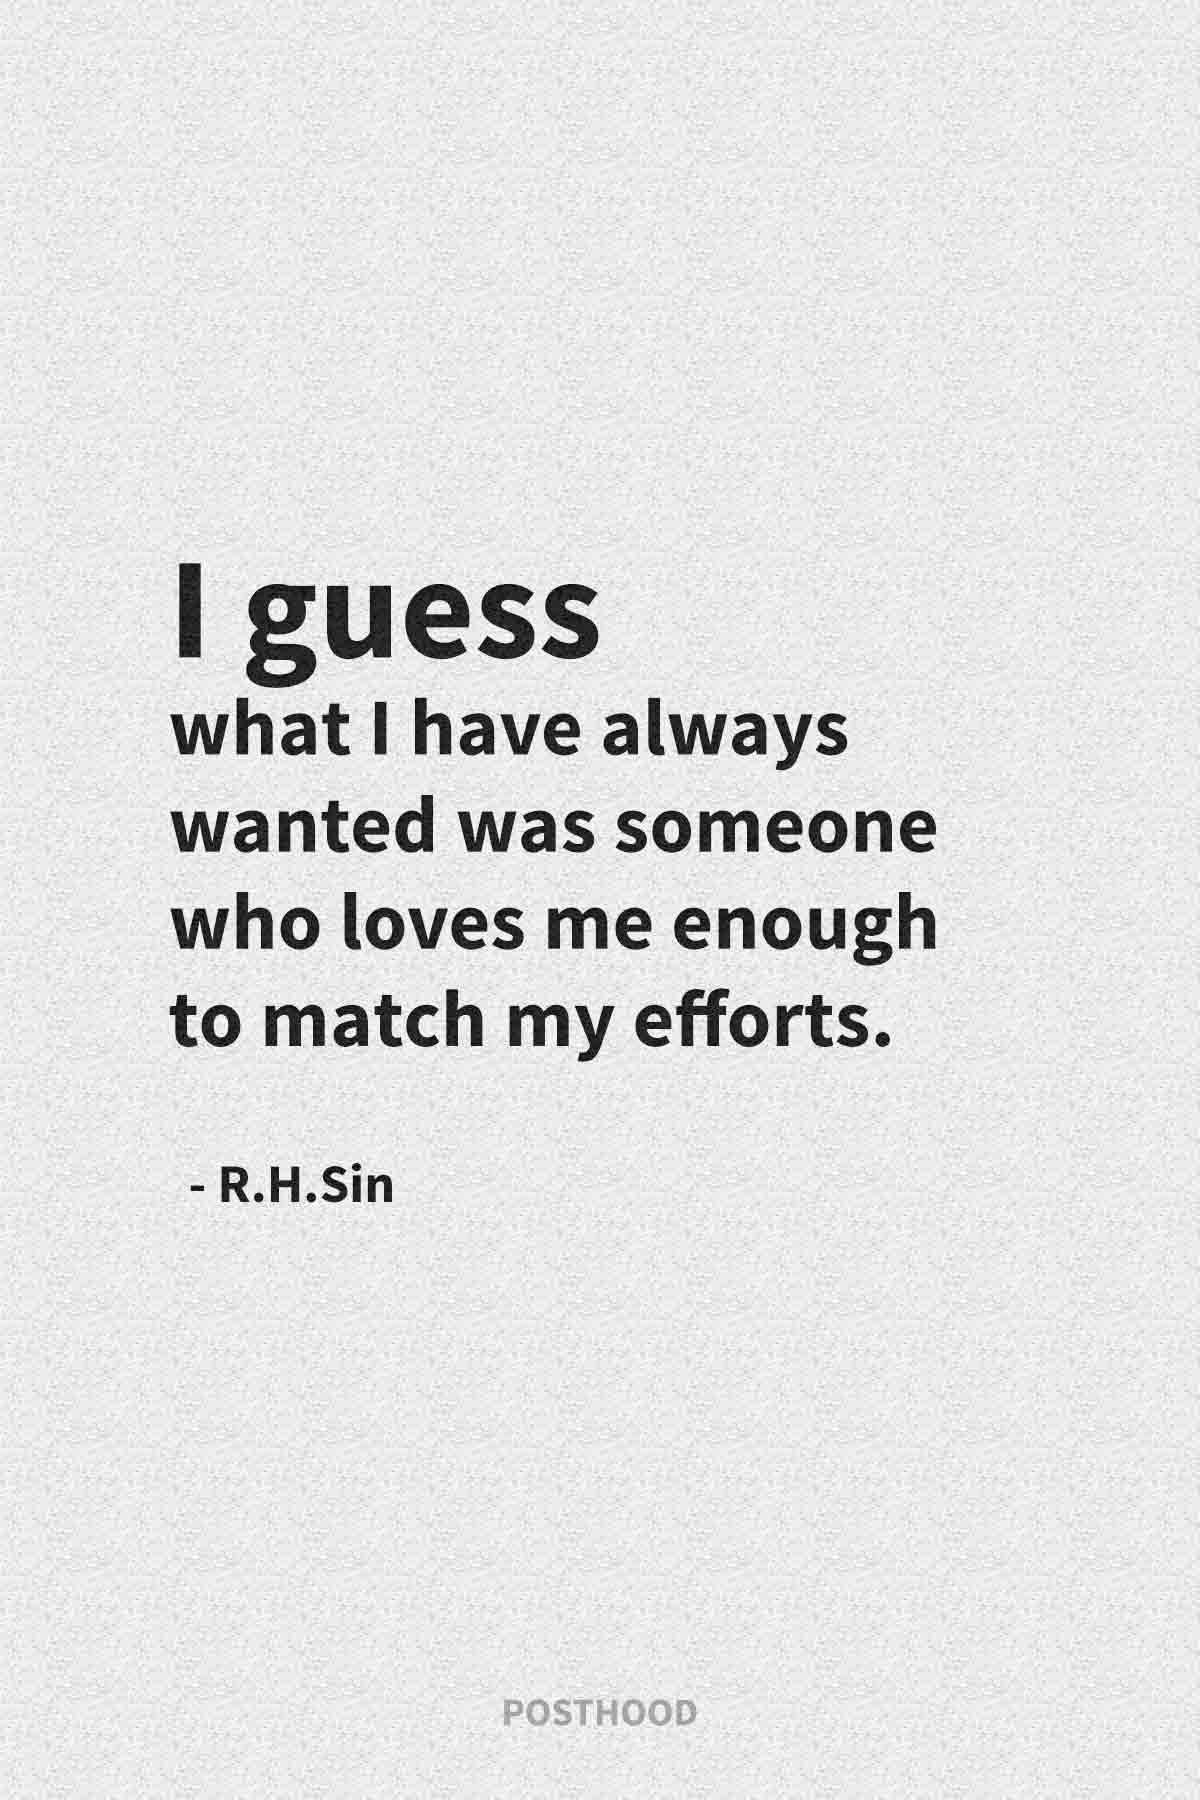 Start loving yourself more with these inspirational R.H.Sin quotes about self-love. Motivational love quotes.